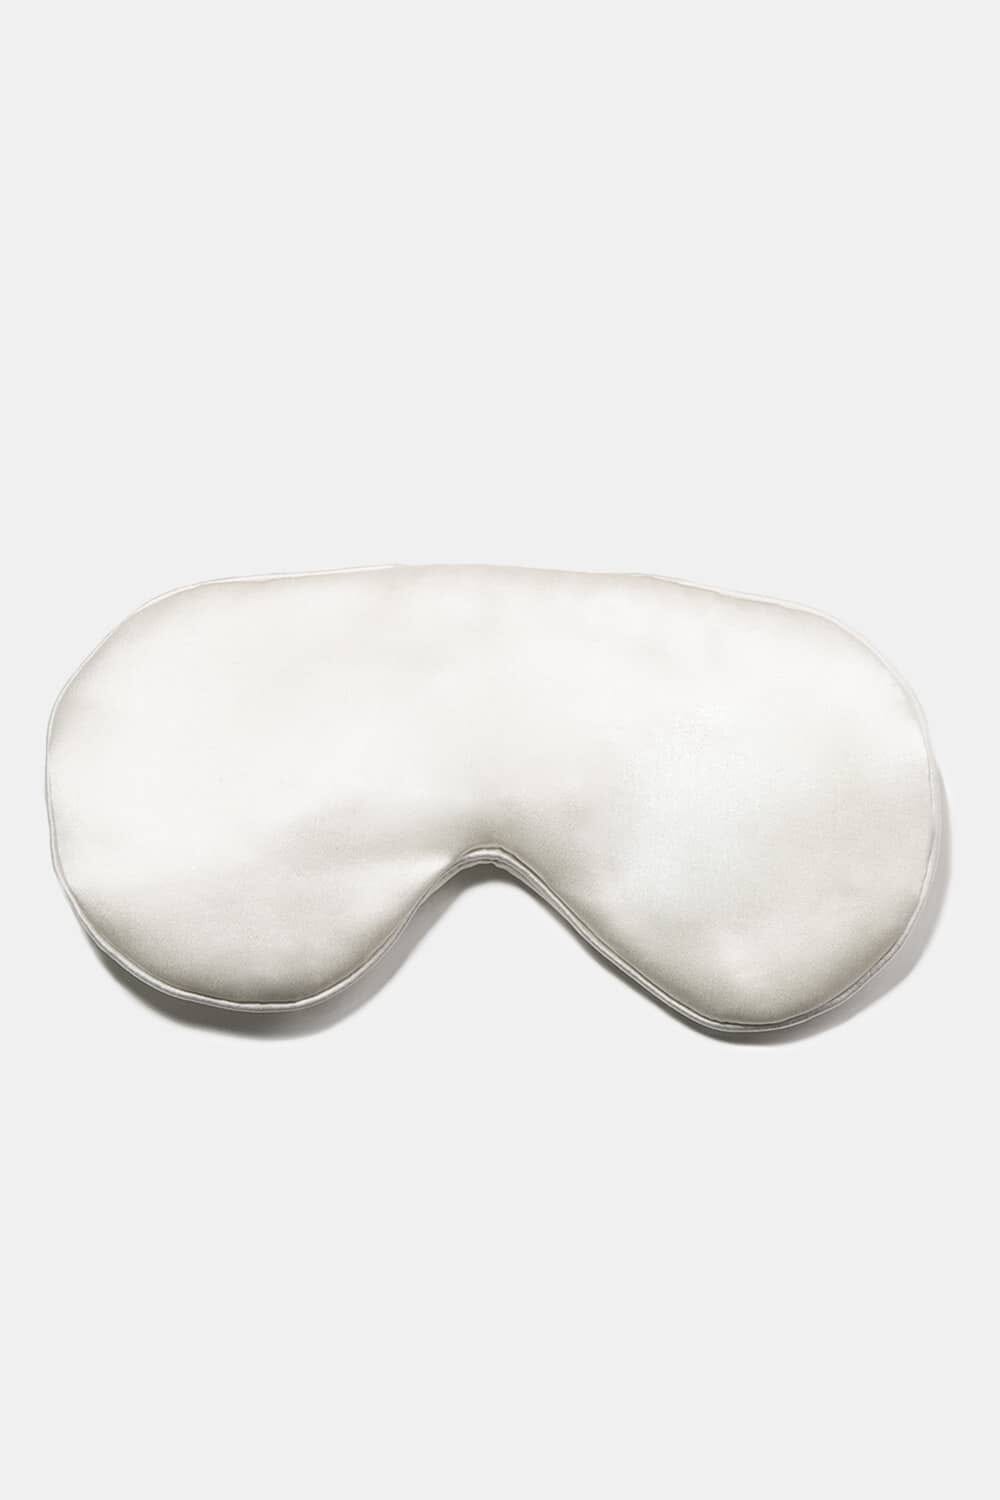 100% Mulberry Silk Therapeutic Sleep Mask - 25 Momme Beauty>Masks Fishers Finery White